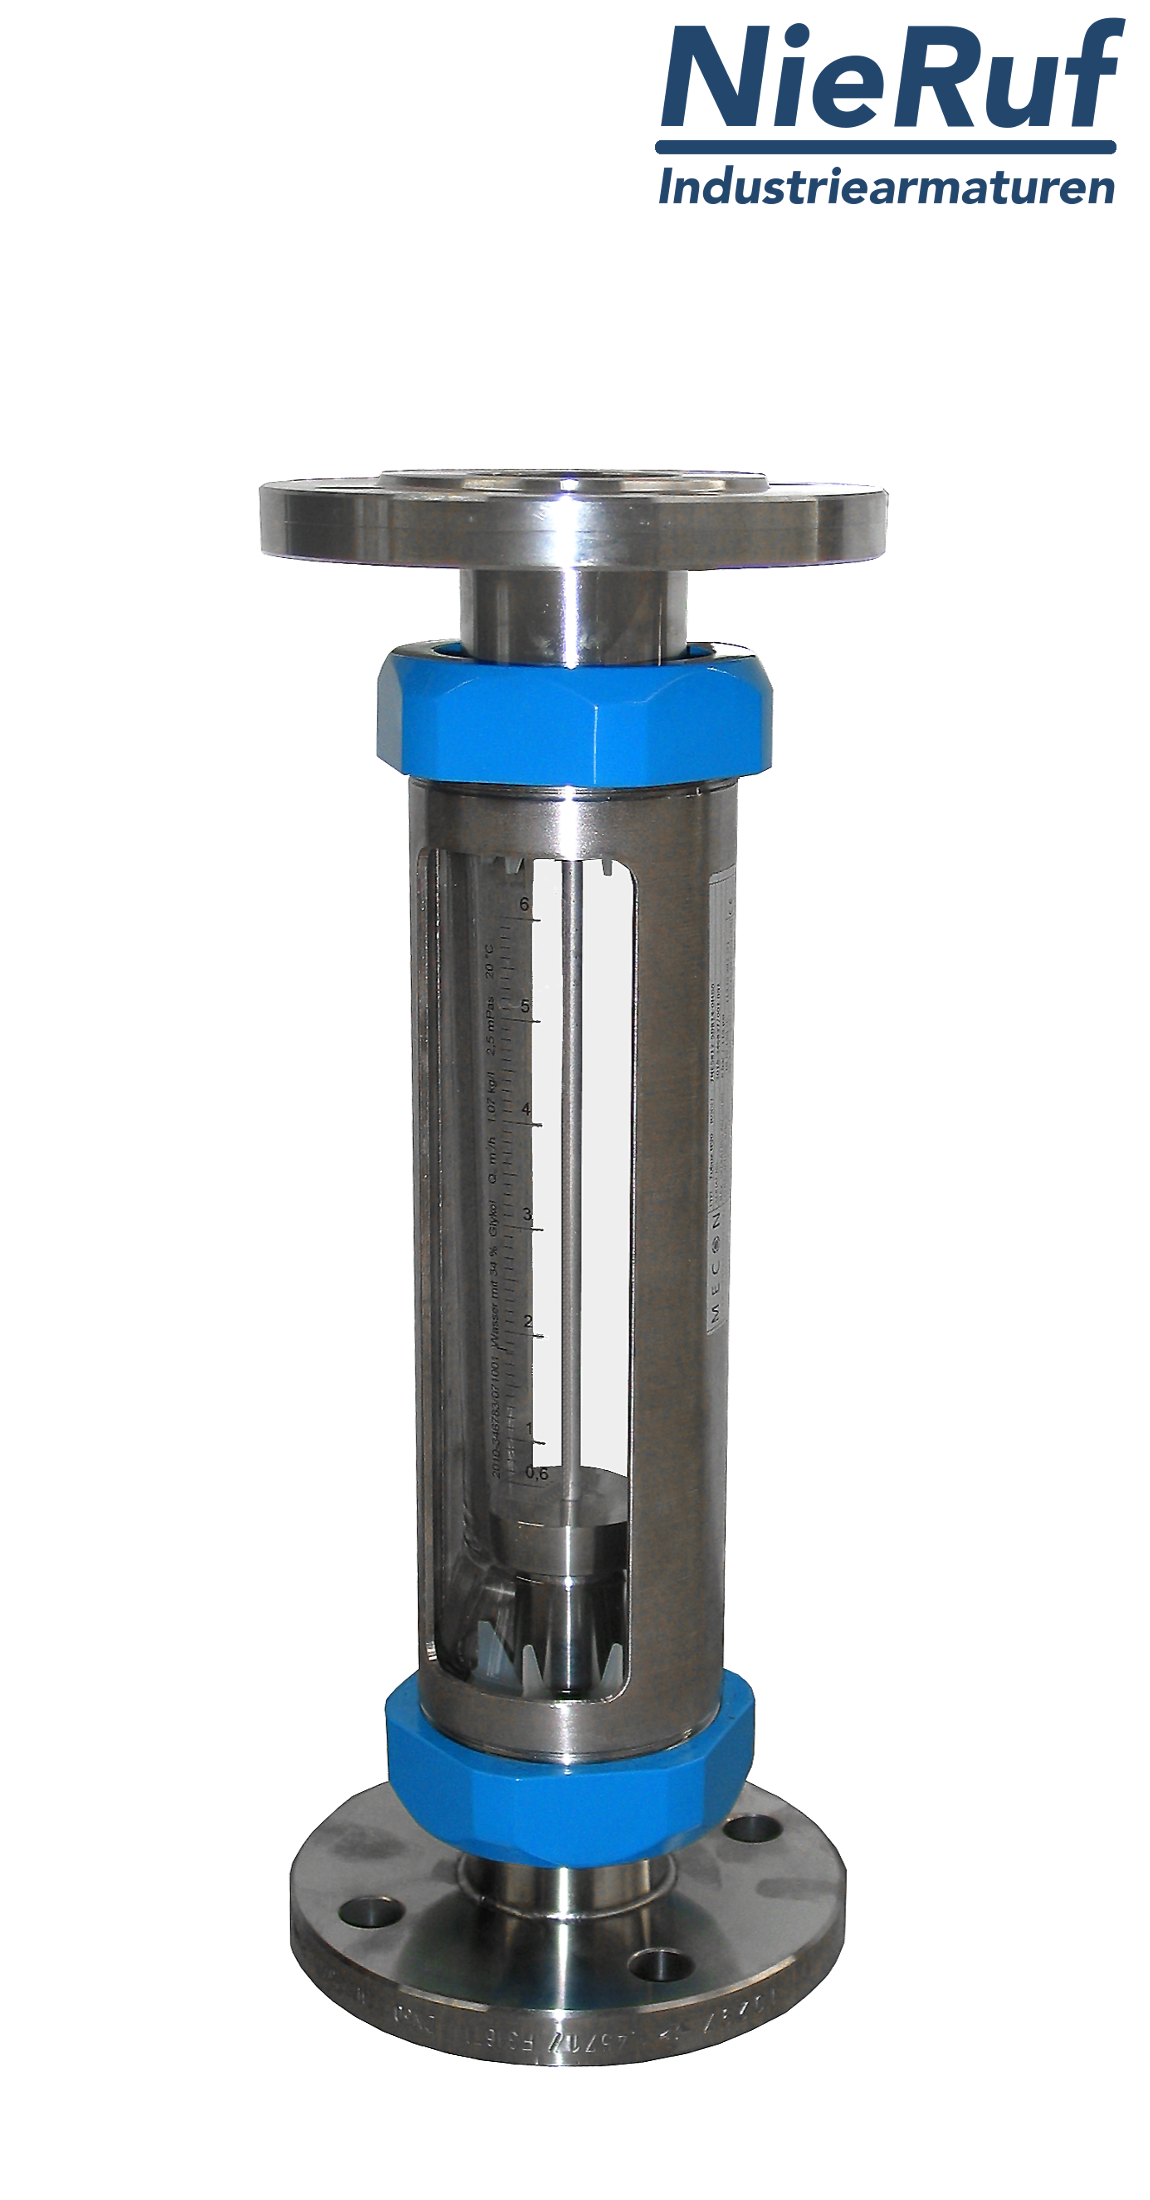 Variable area flowmeter stainless steel + borosilicate flange DN50 65.0 - 650 l/h water FKM